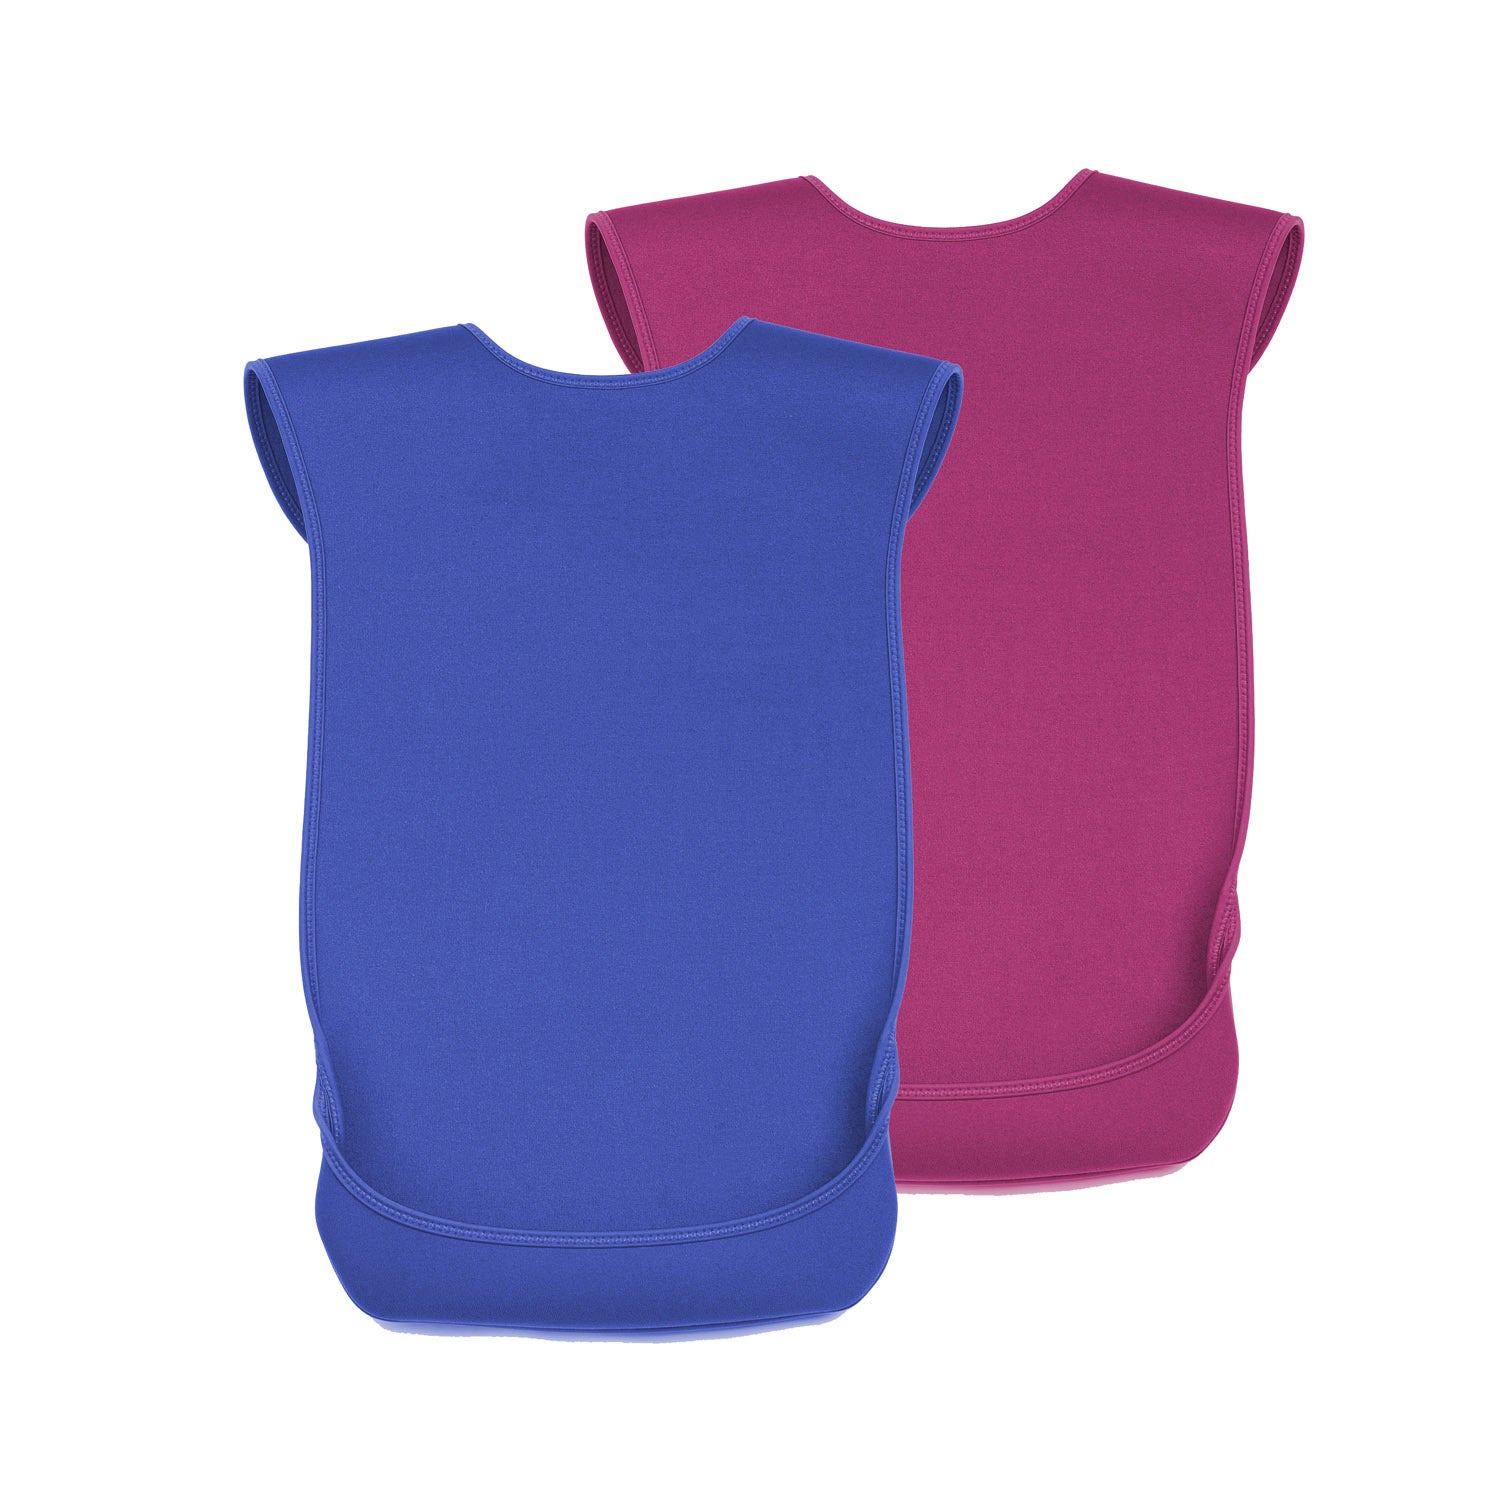 CareDesign_pink_or_blue_tabard_for_toddlers_kids_adults_with_special_needs_bib_with_feeding_pouch